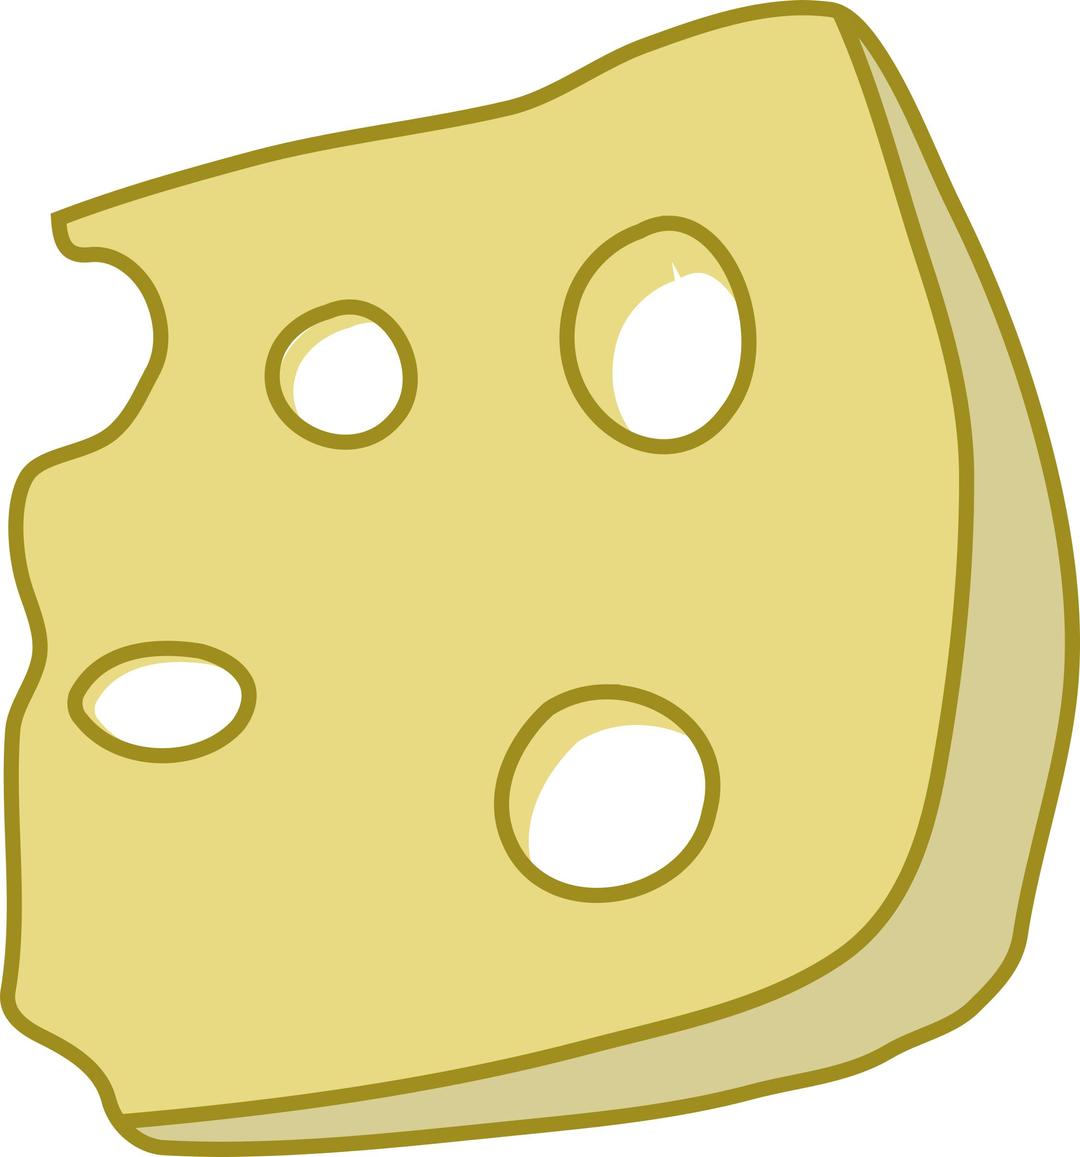 Cheese png transparent